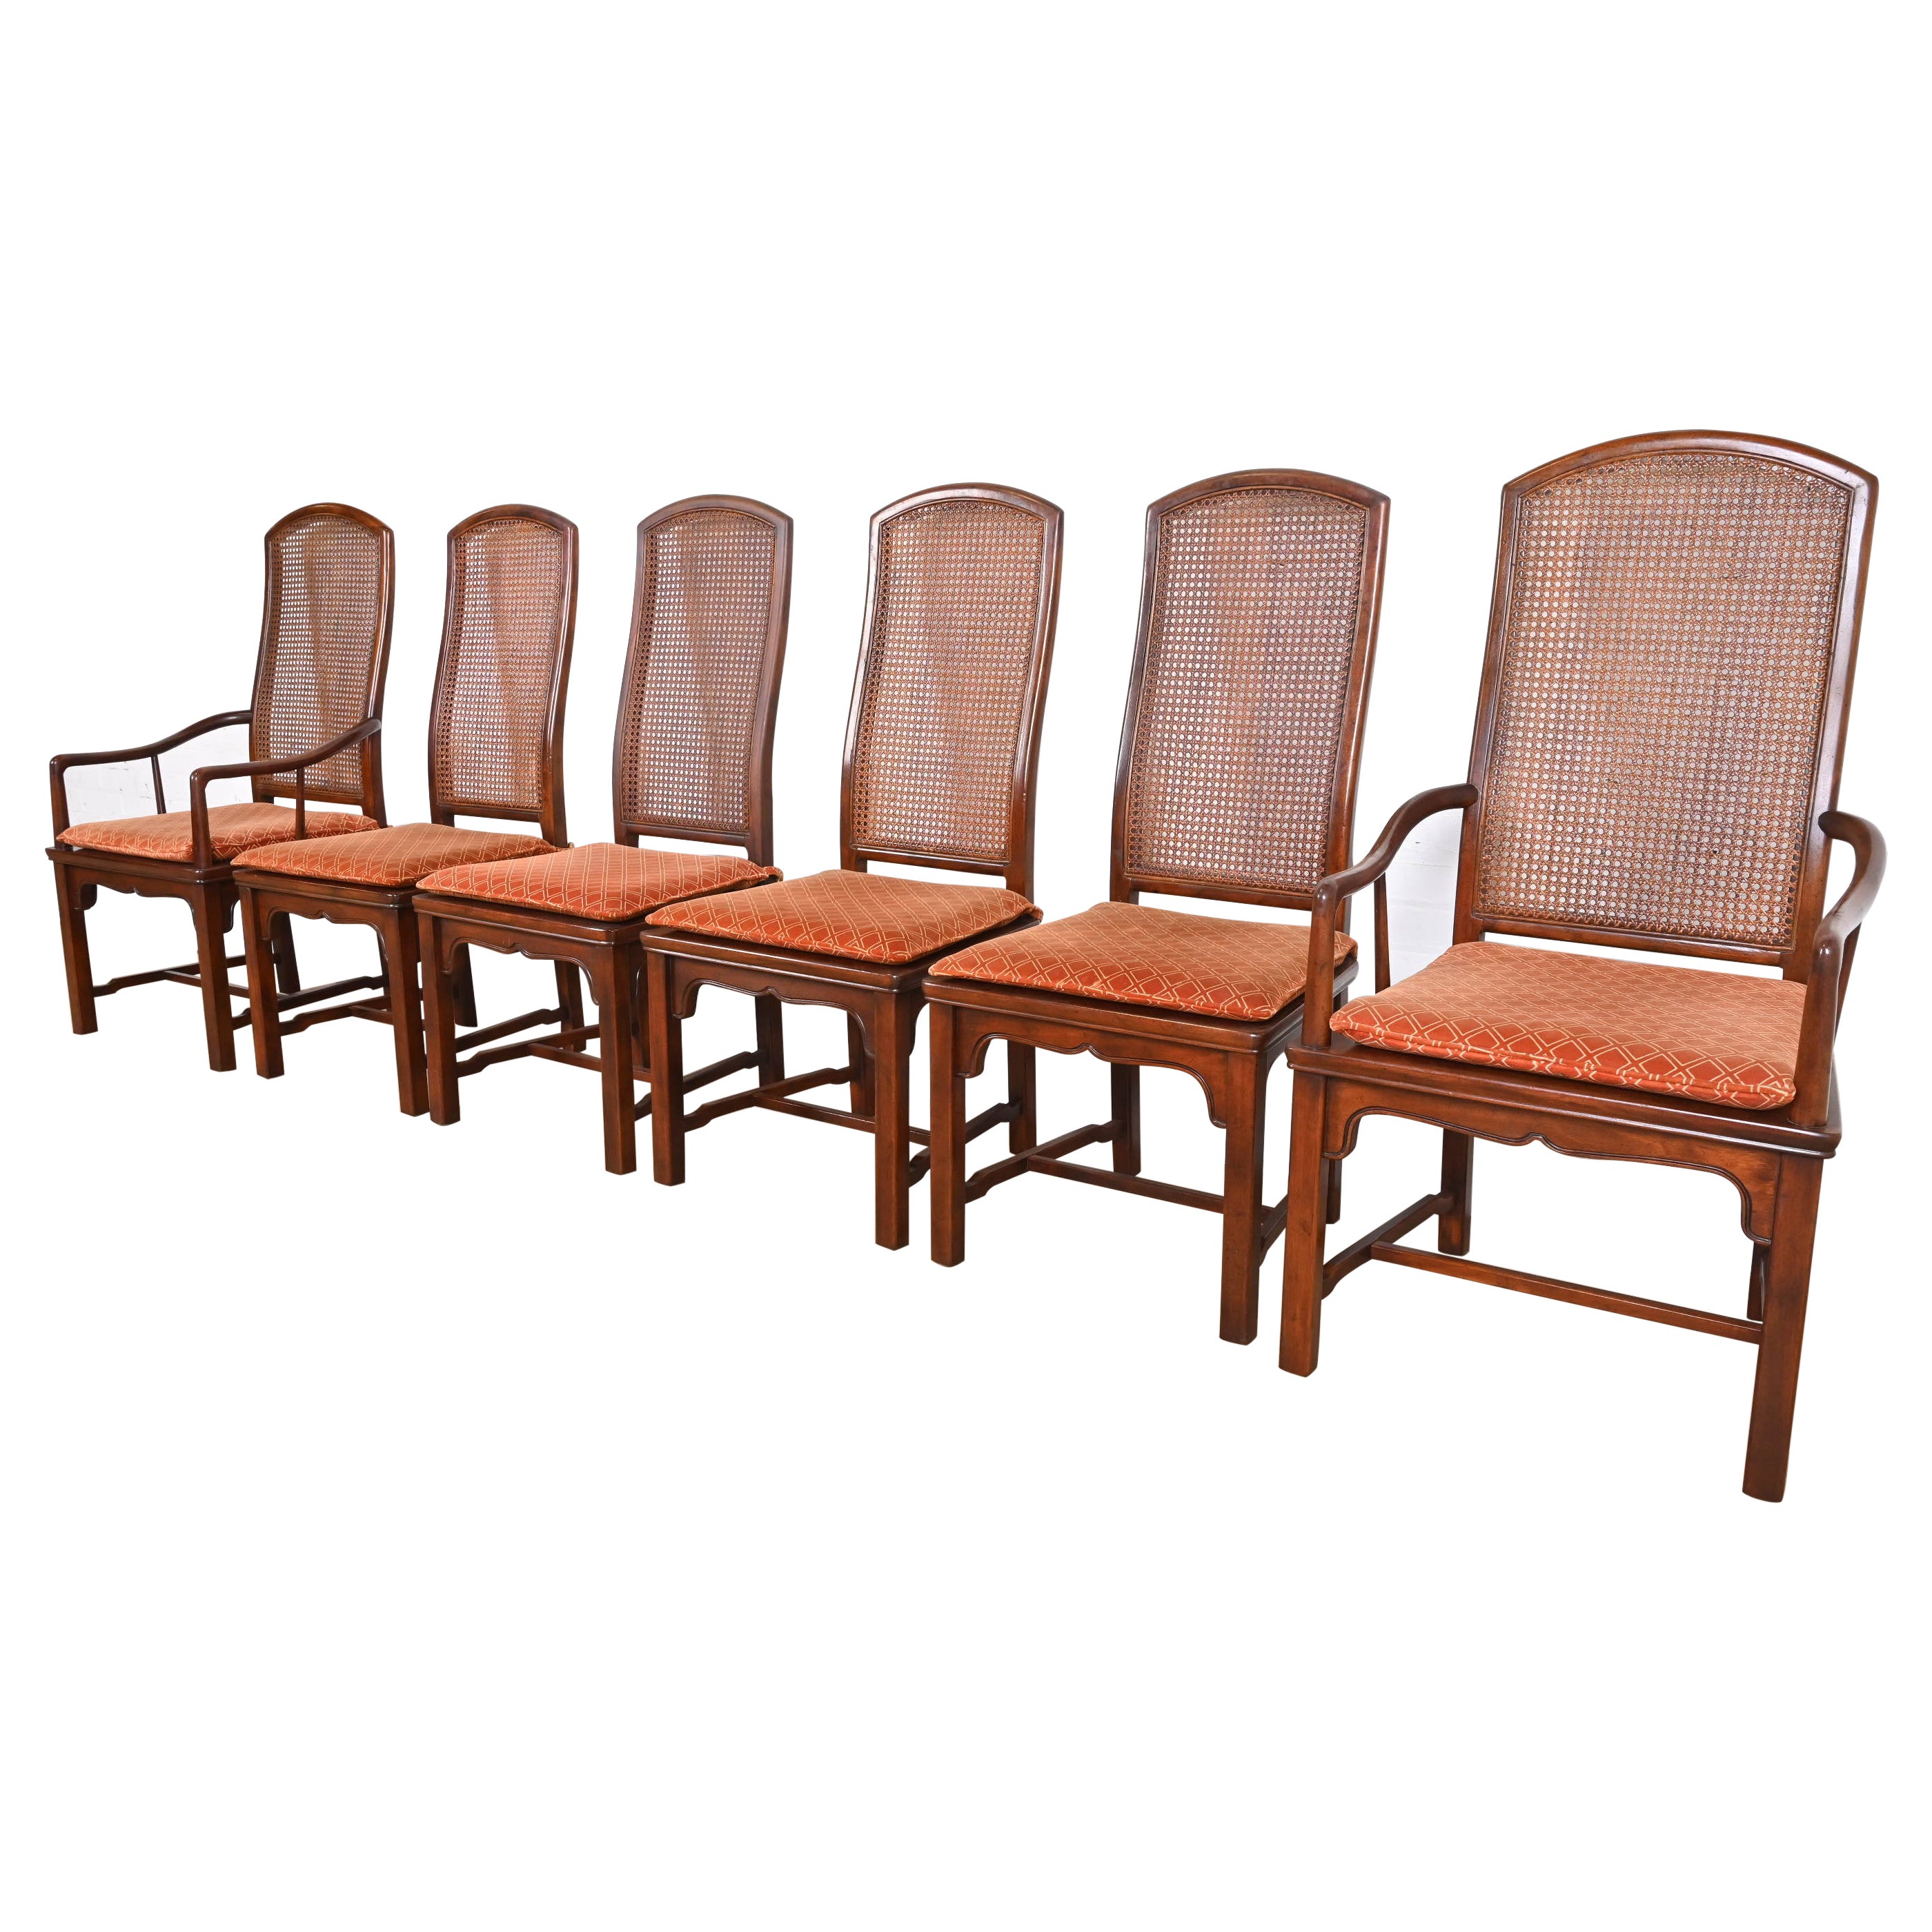 What are dining room chairs with arms called?